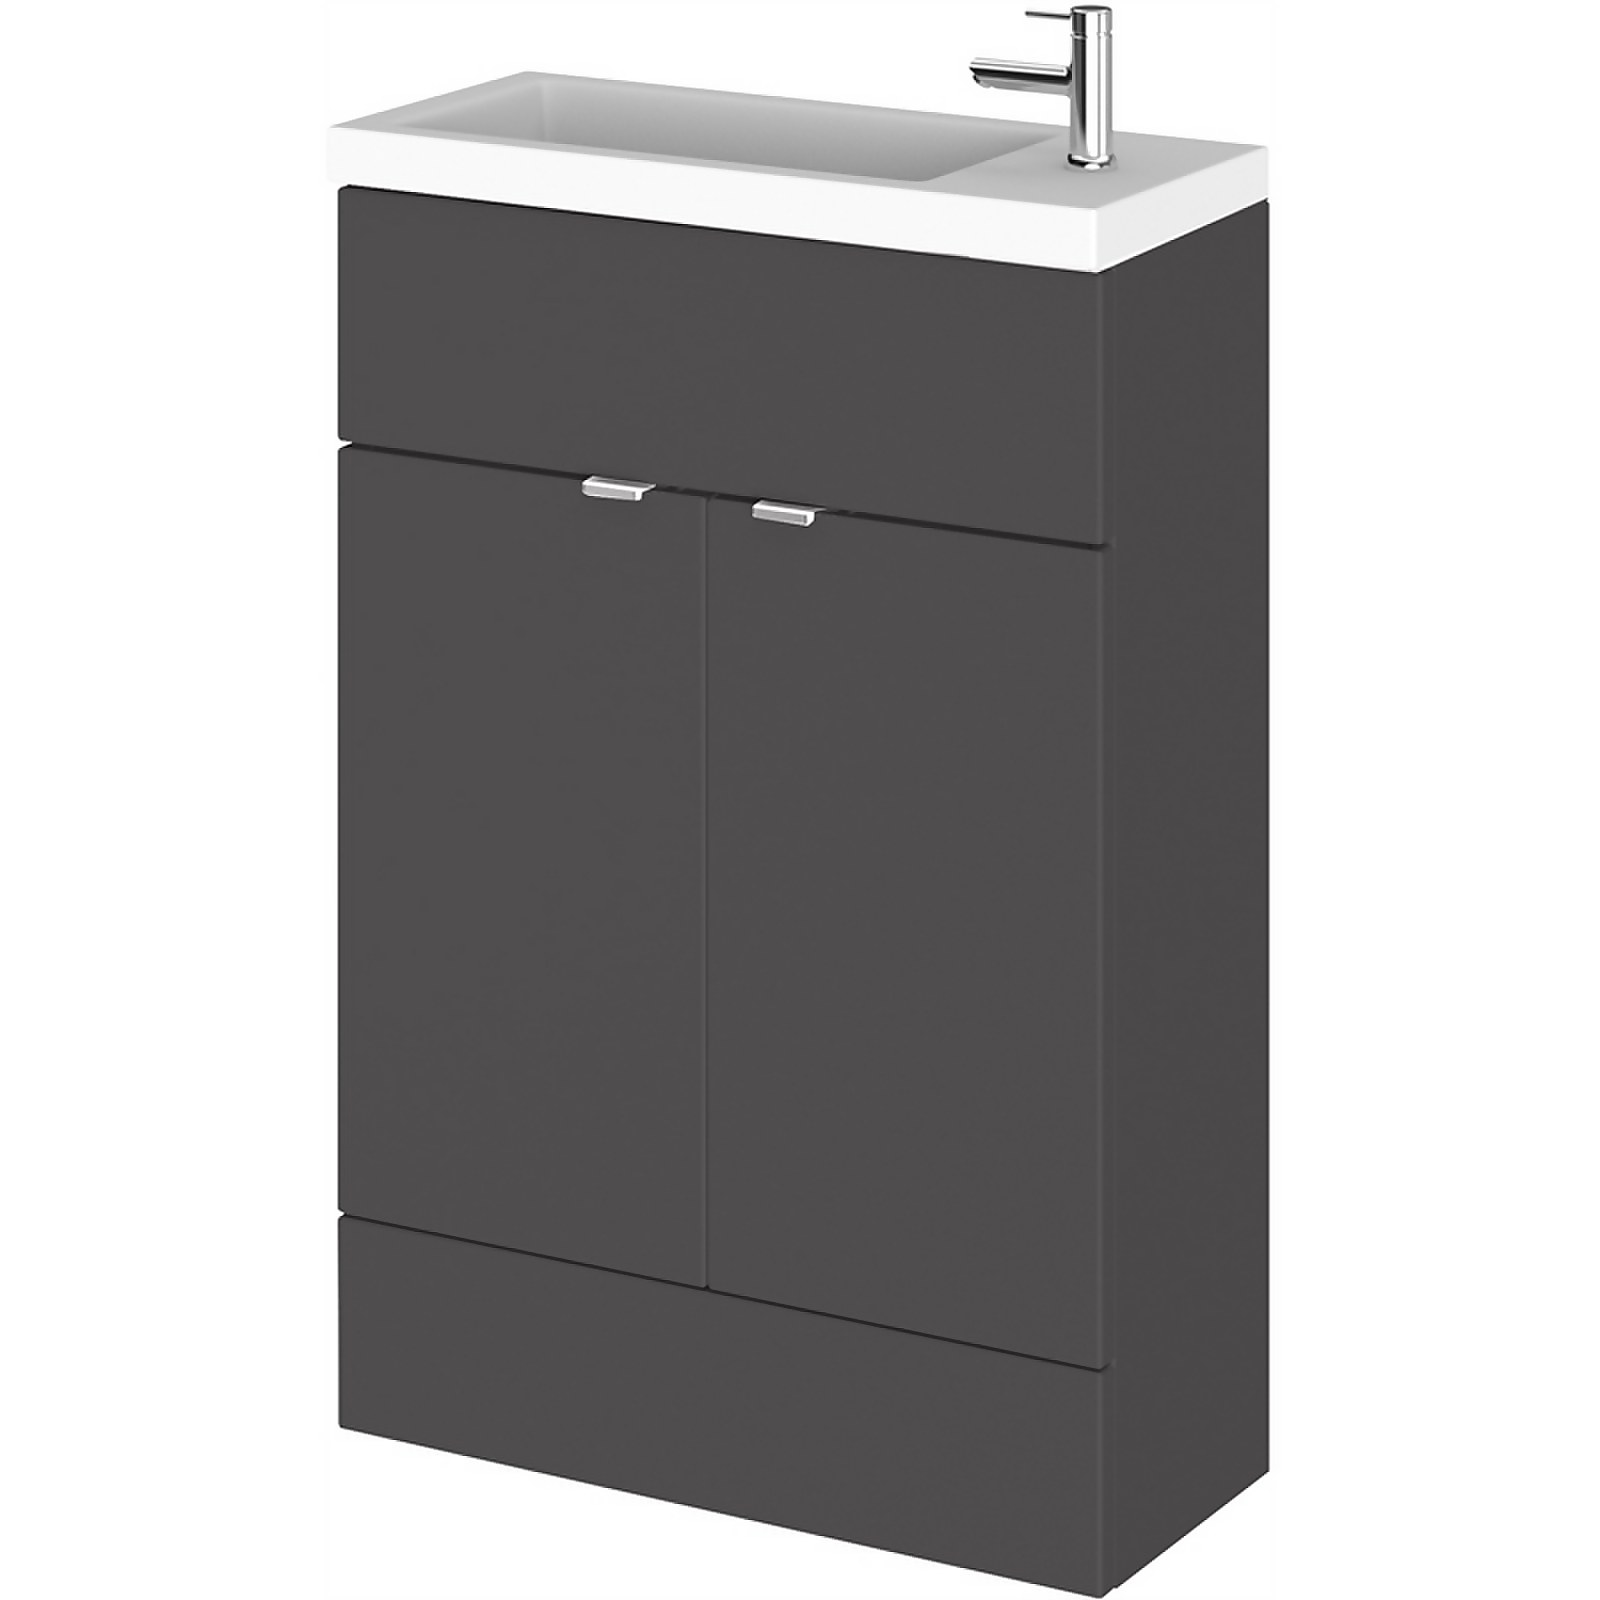 Photo of Balterley Dynamic 600mm Compact Vanity Unit With Basin - Gloss Grey